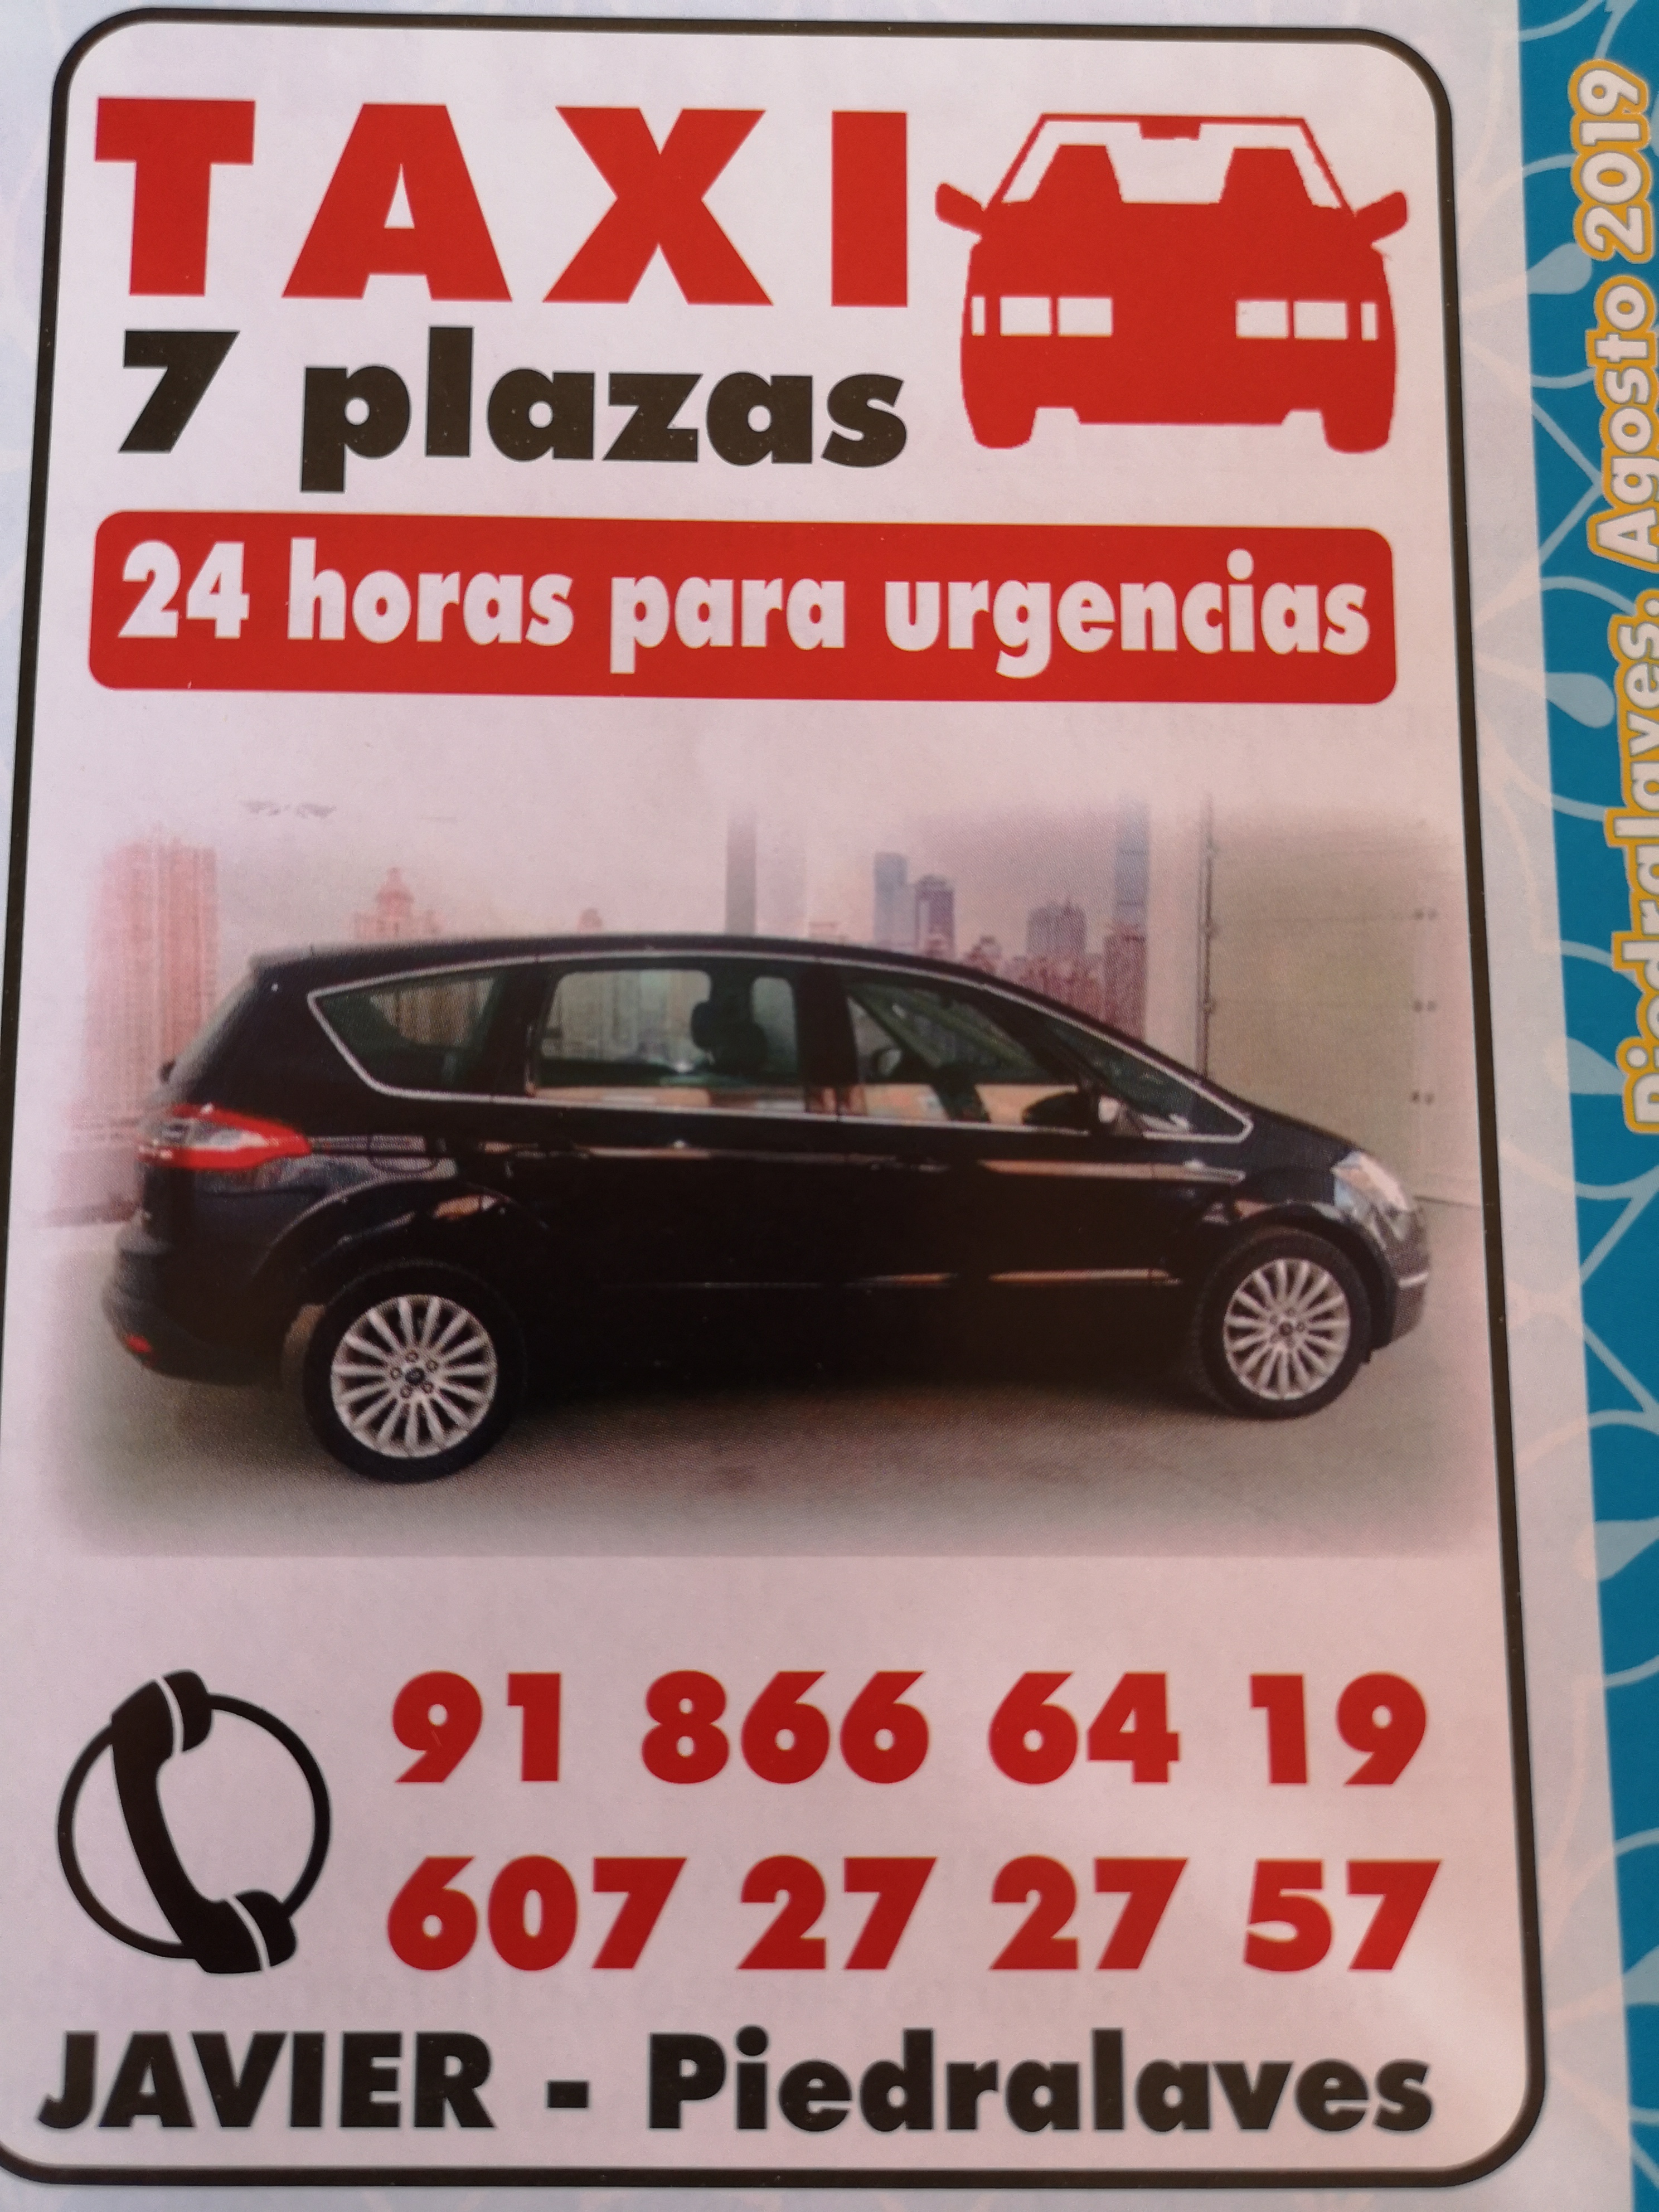 Images Taxis Javier Alonso